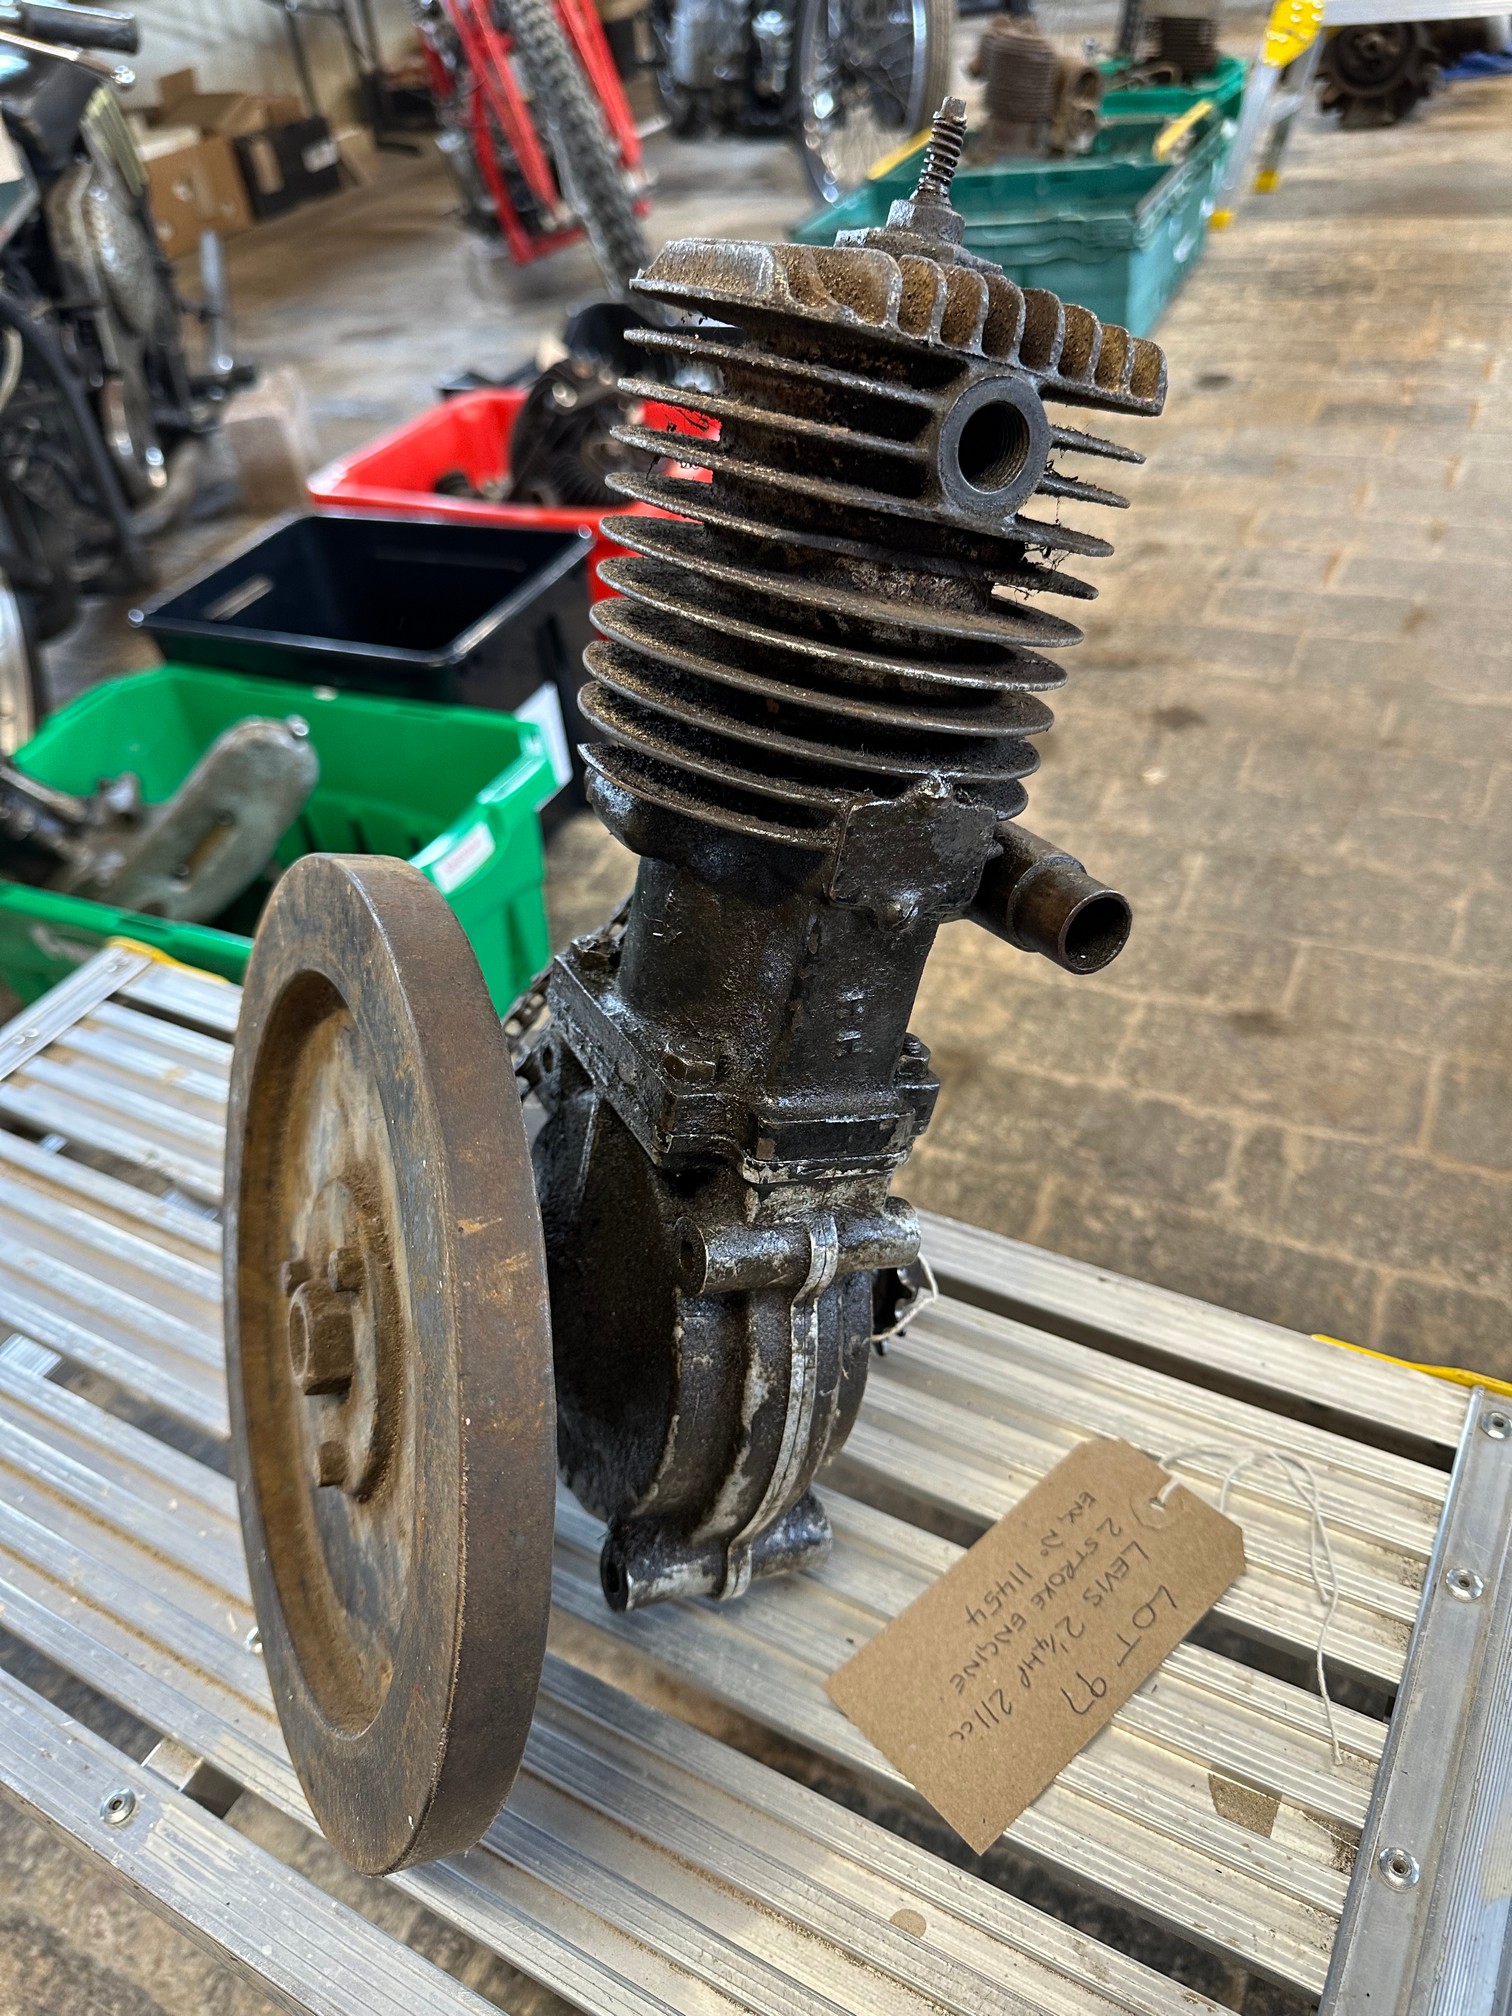 LEVIS 2 1/4 HP 211cc 2 STROKE ENGINE - Image 3 of 3